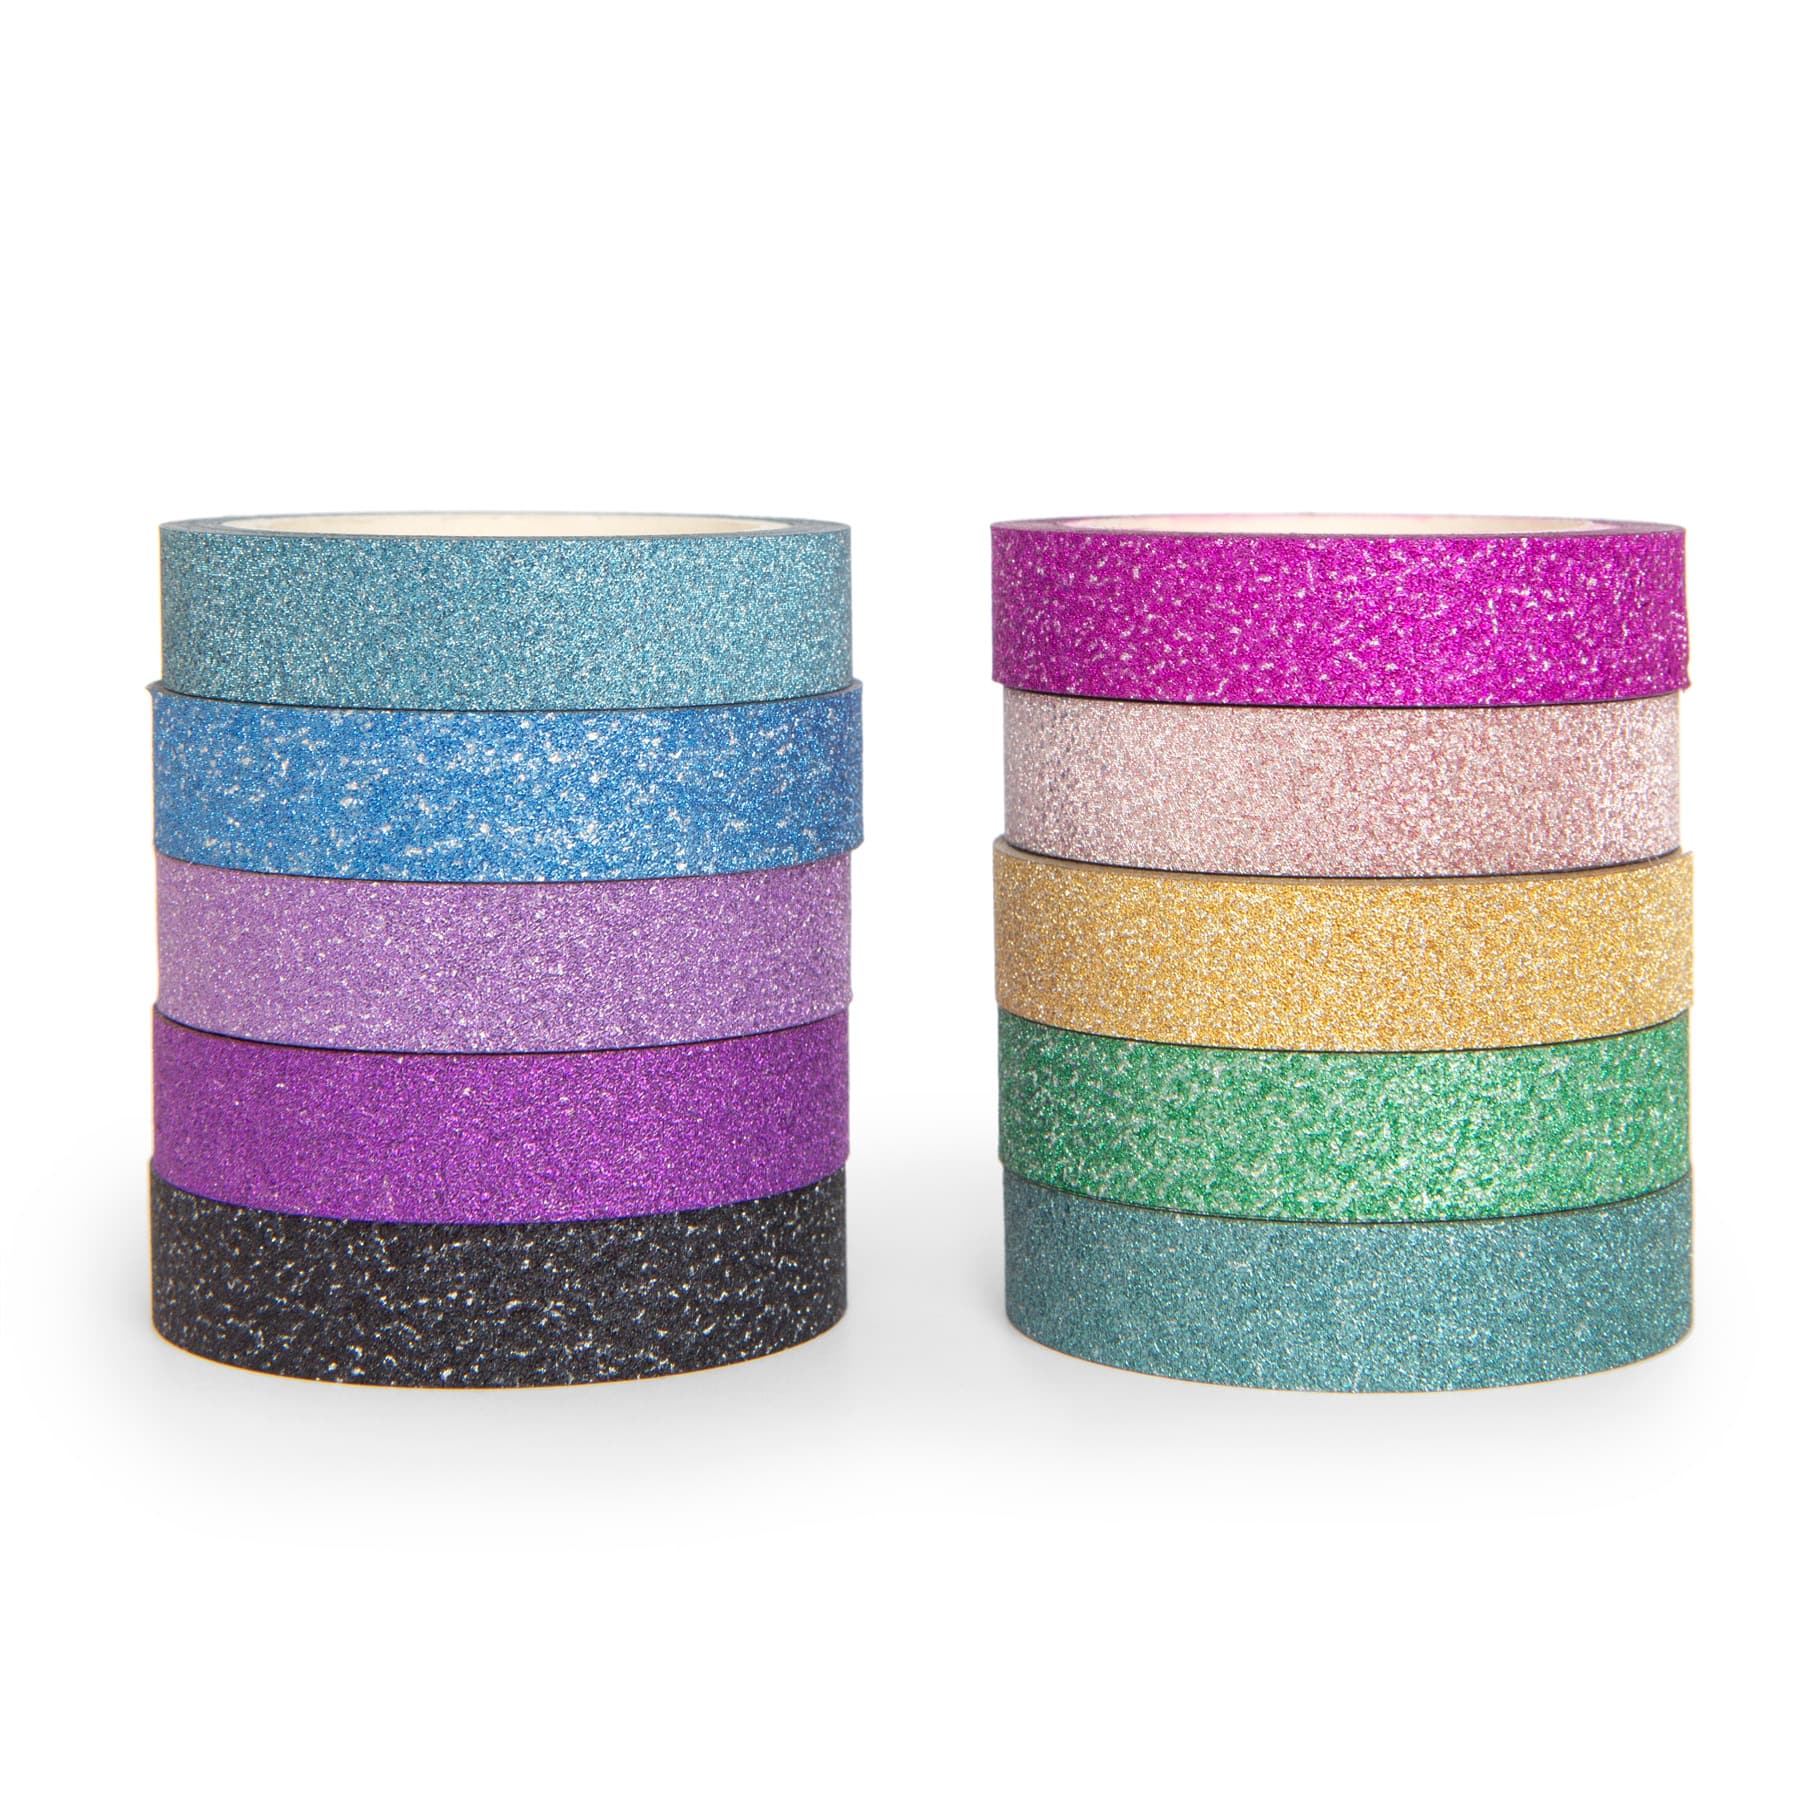 Metallic Foil Crafting Tape Set by Recollections™